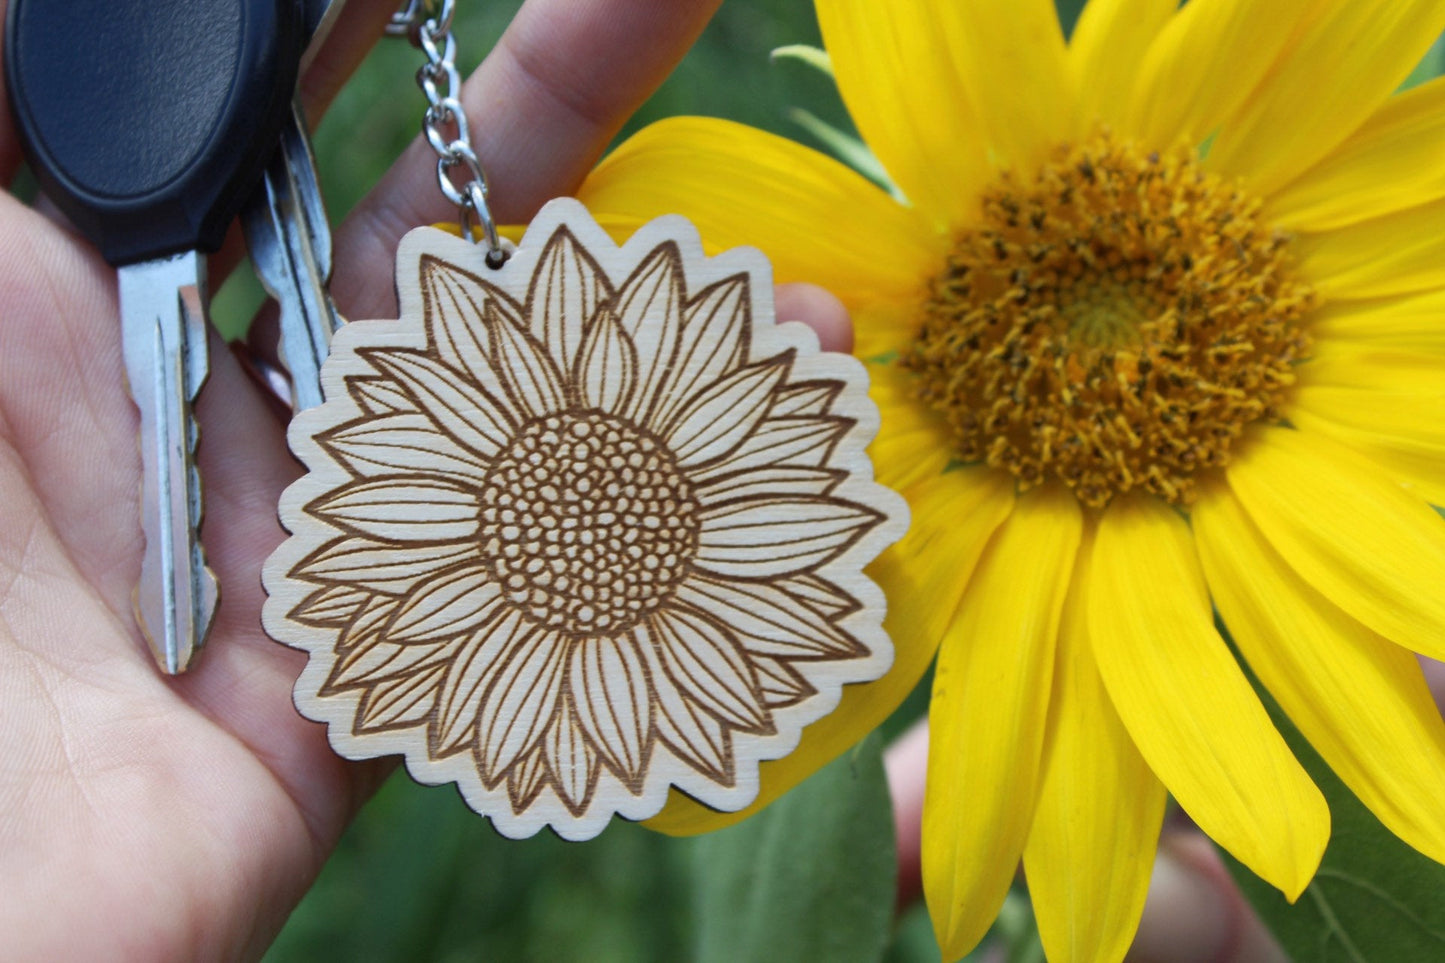 Cute Sunflower Wooden Keychain Gift For Her, Cute Natural Wood Sunflower Sustainable Garden Gift For Her